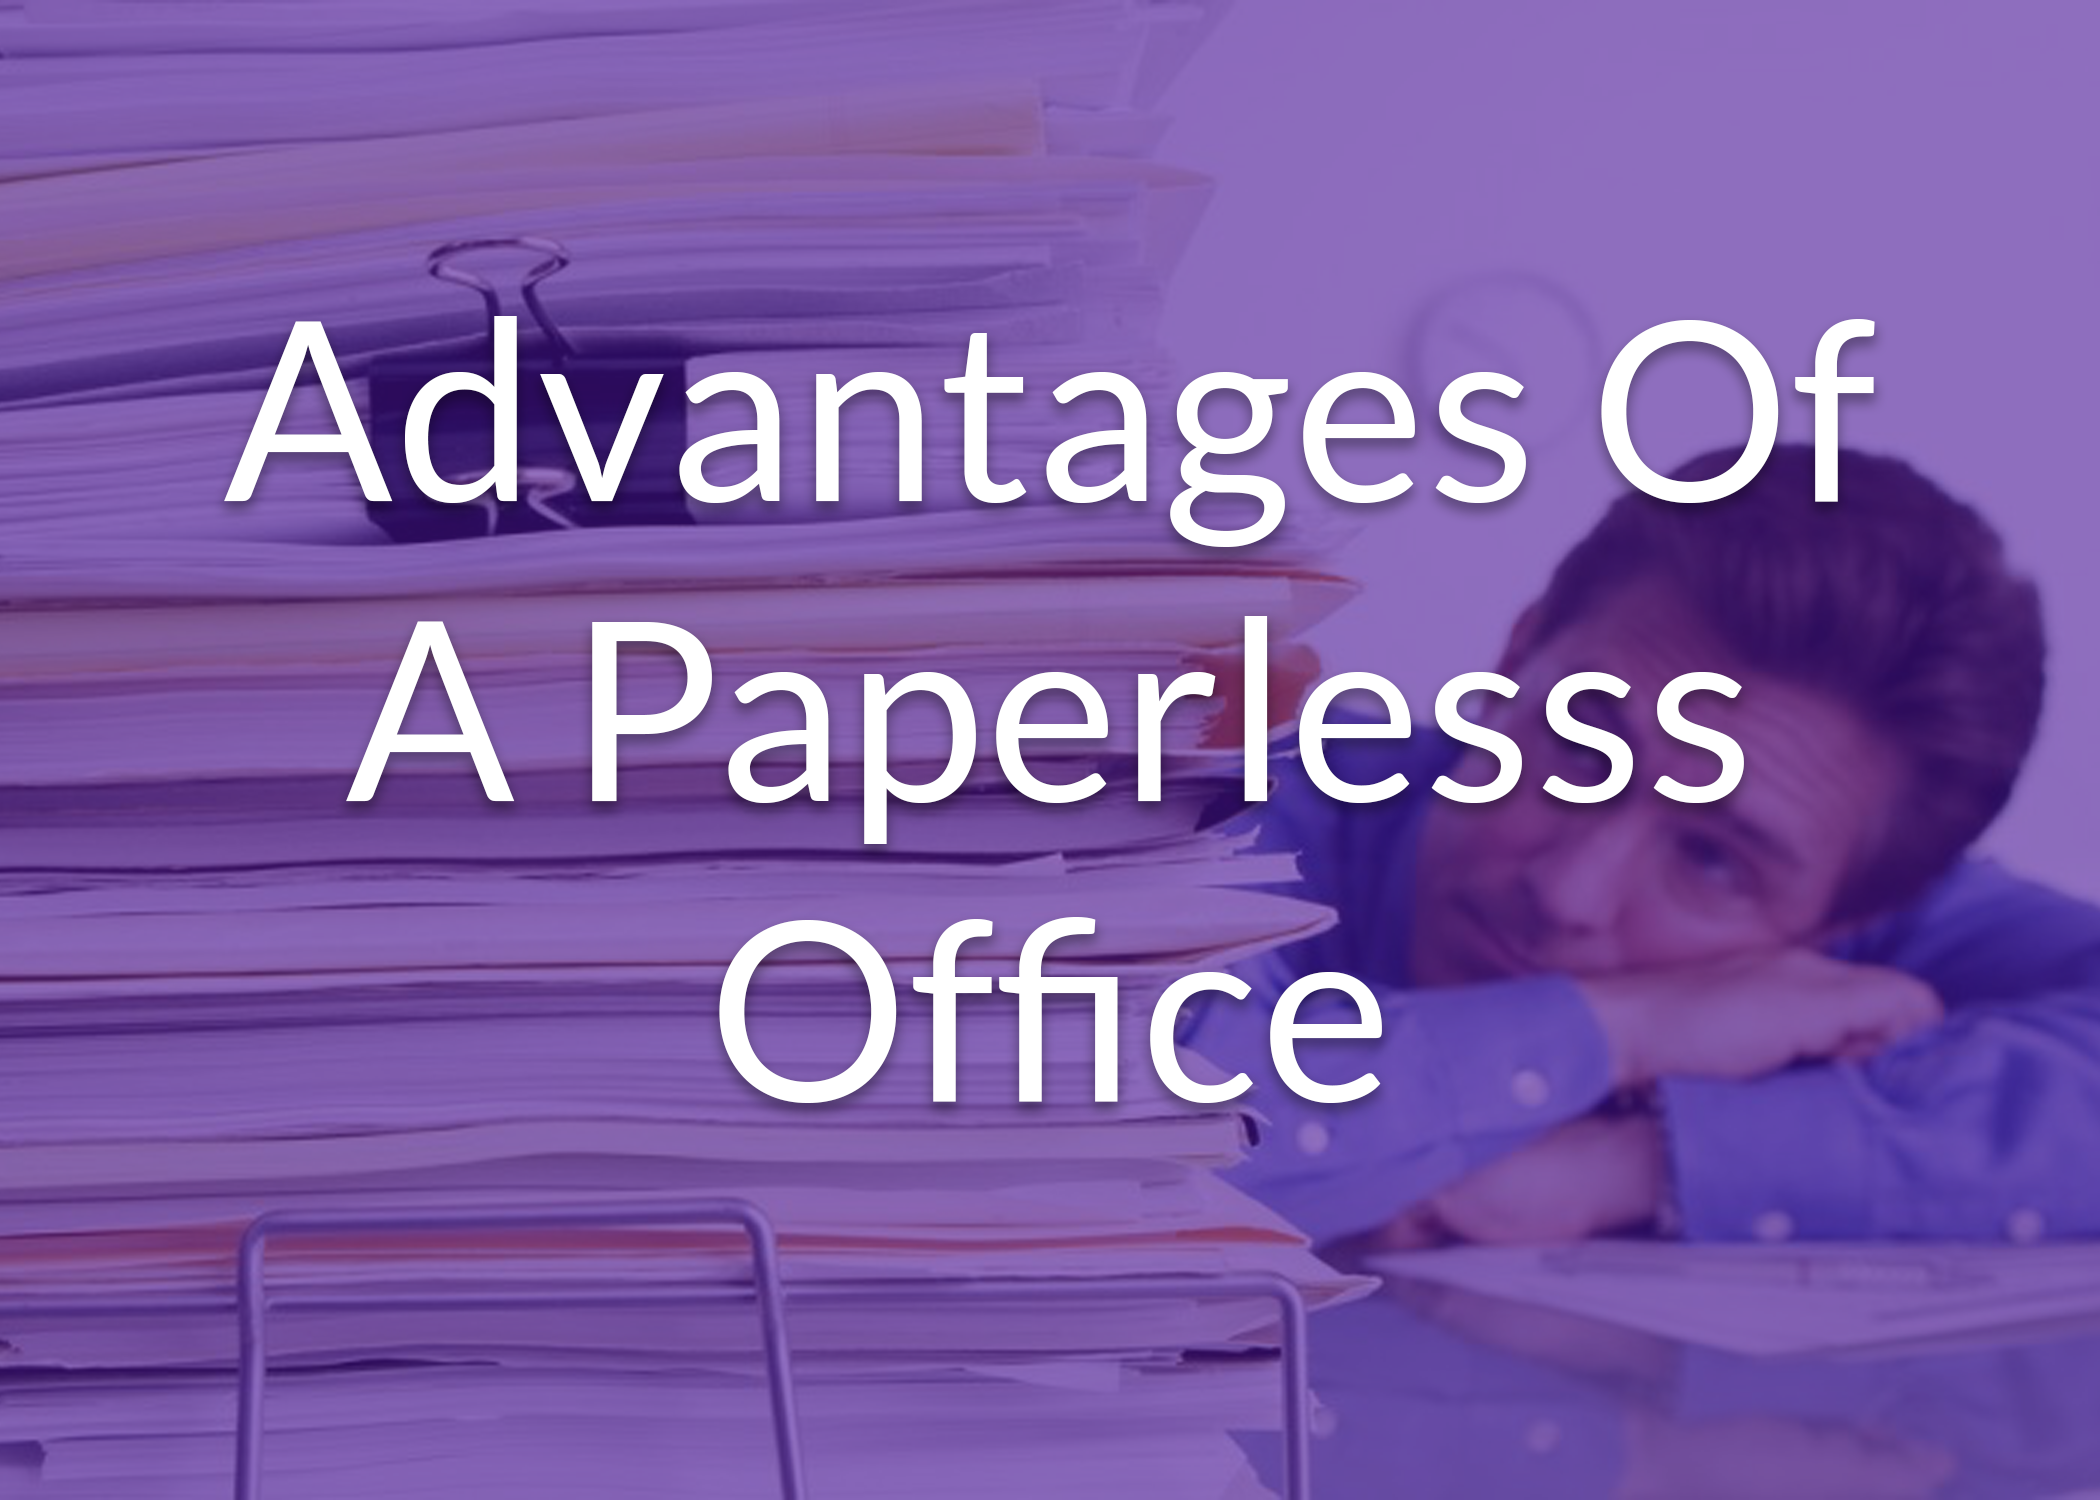 benefits of paperless office